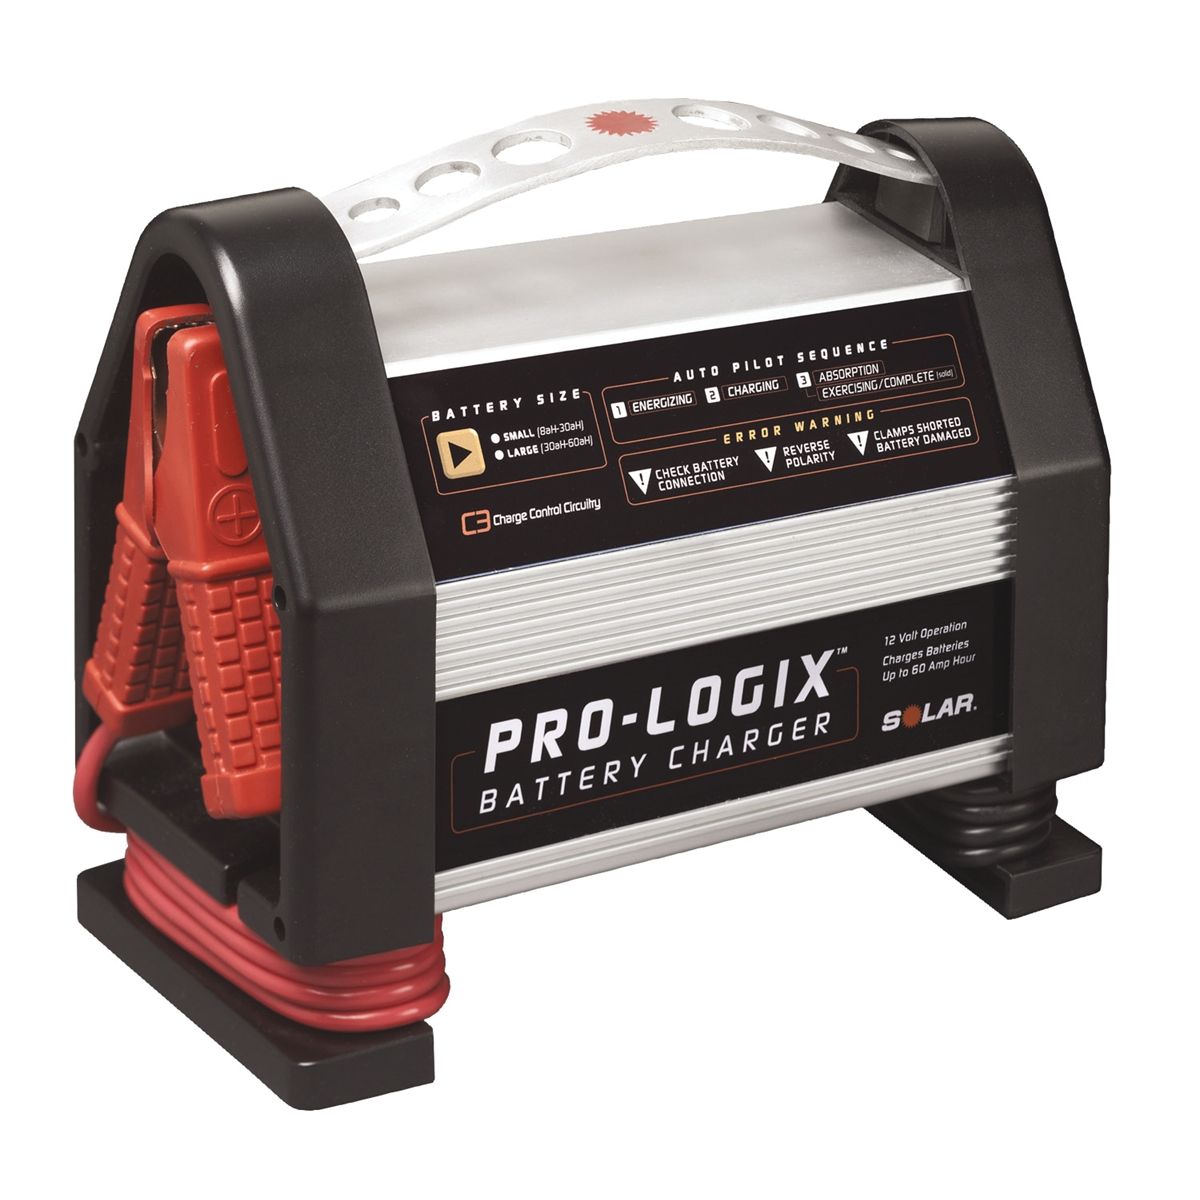 Pro-Logix Automatic Battery Charger - 8 Amp